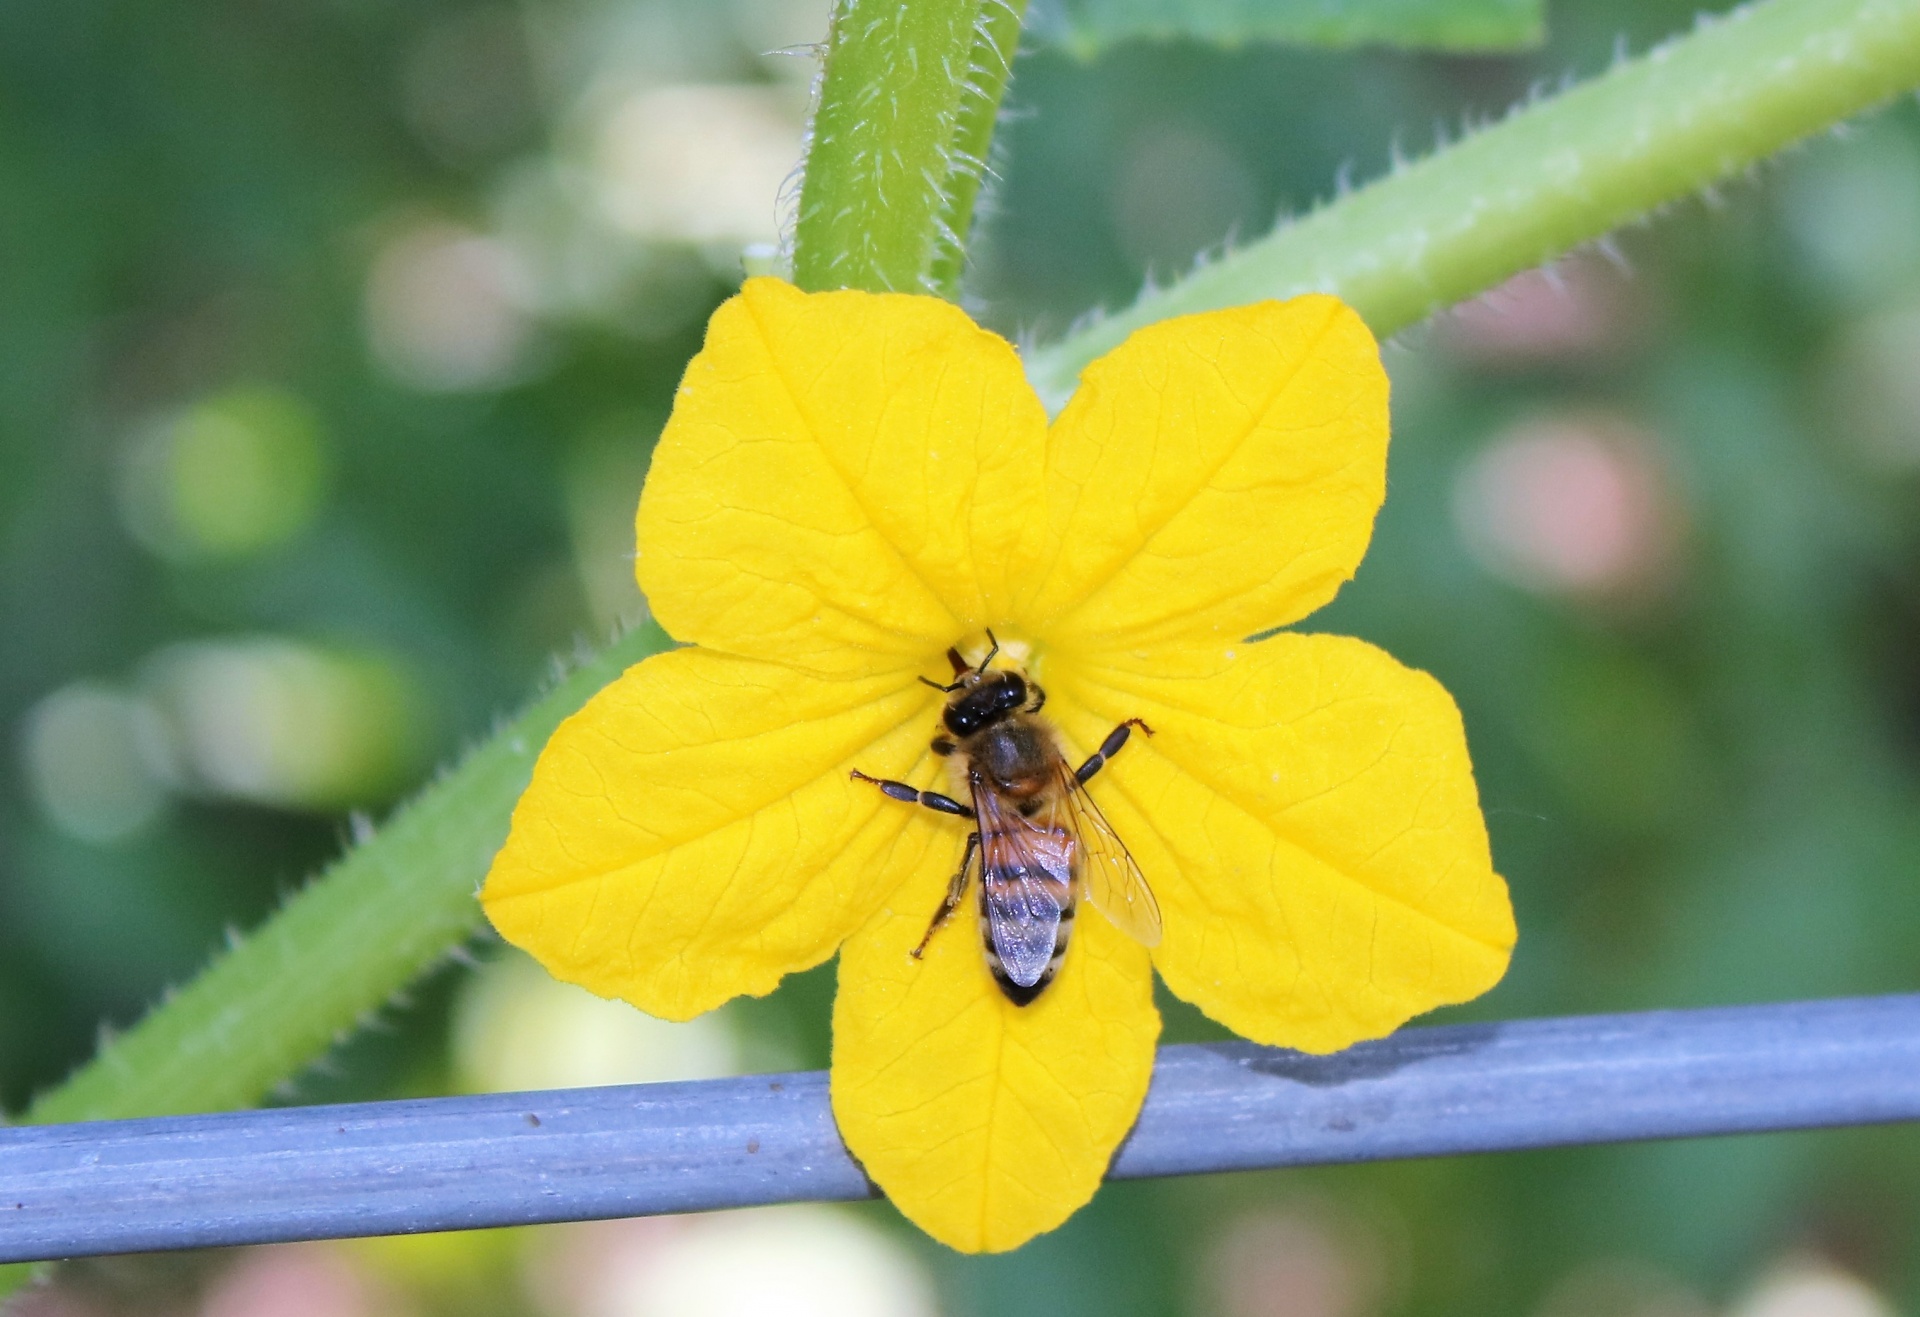 Close-up of a honey bee gathering pollen from a bright yellow cucumber bloom.